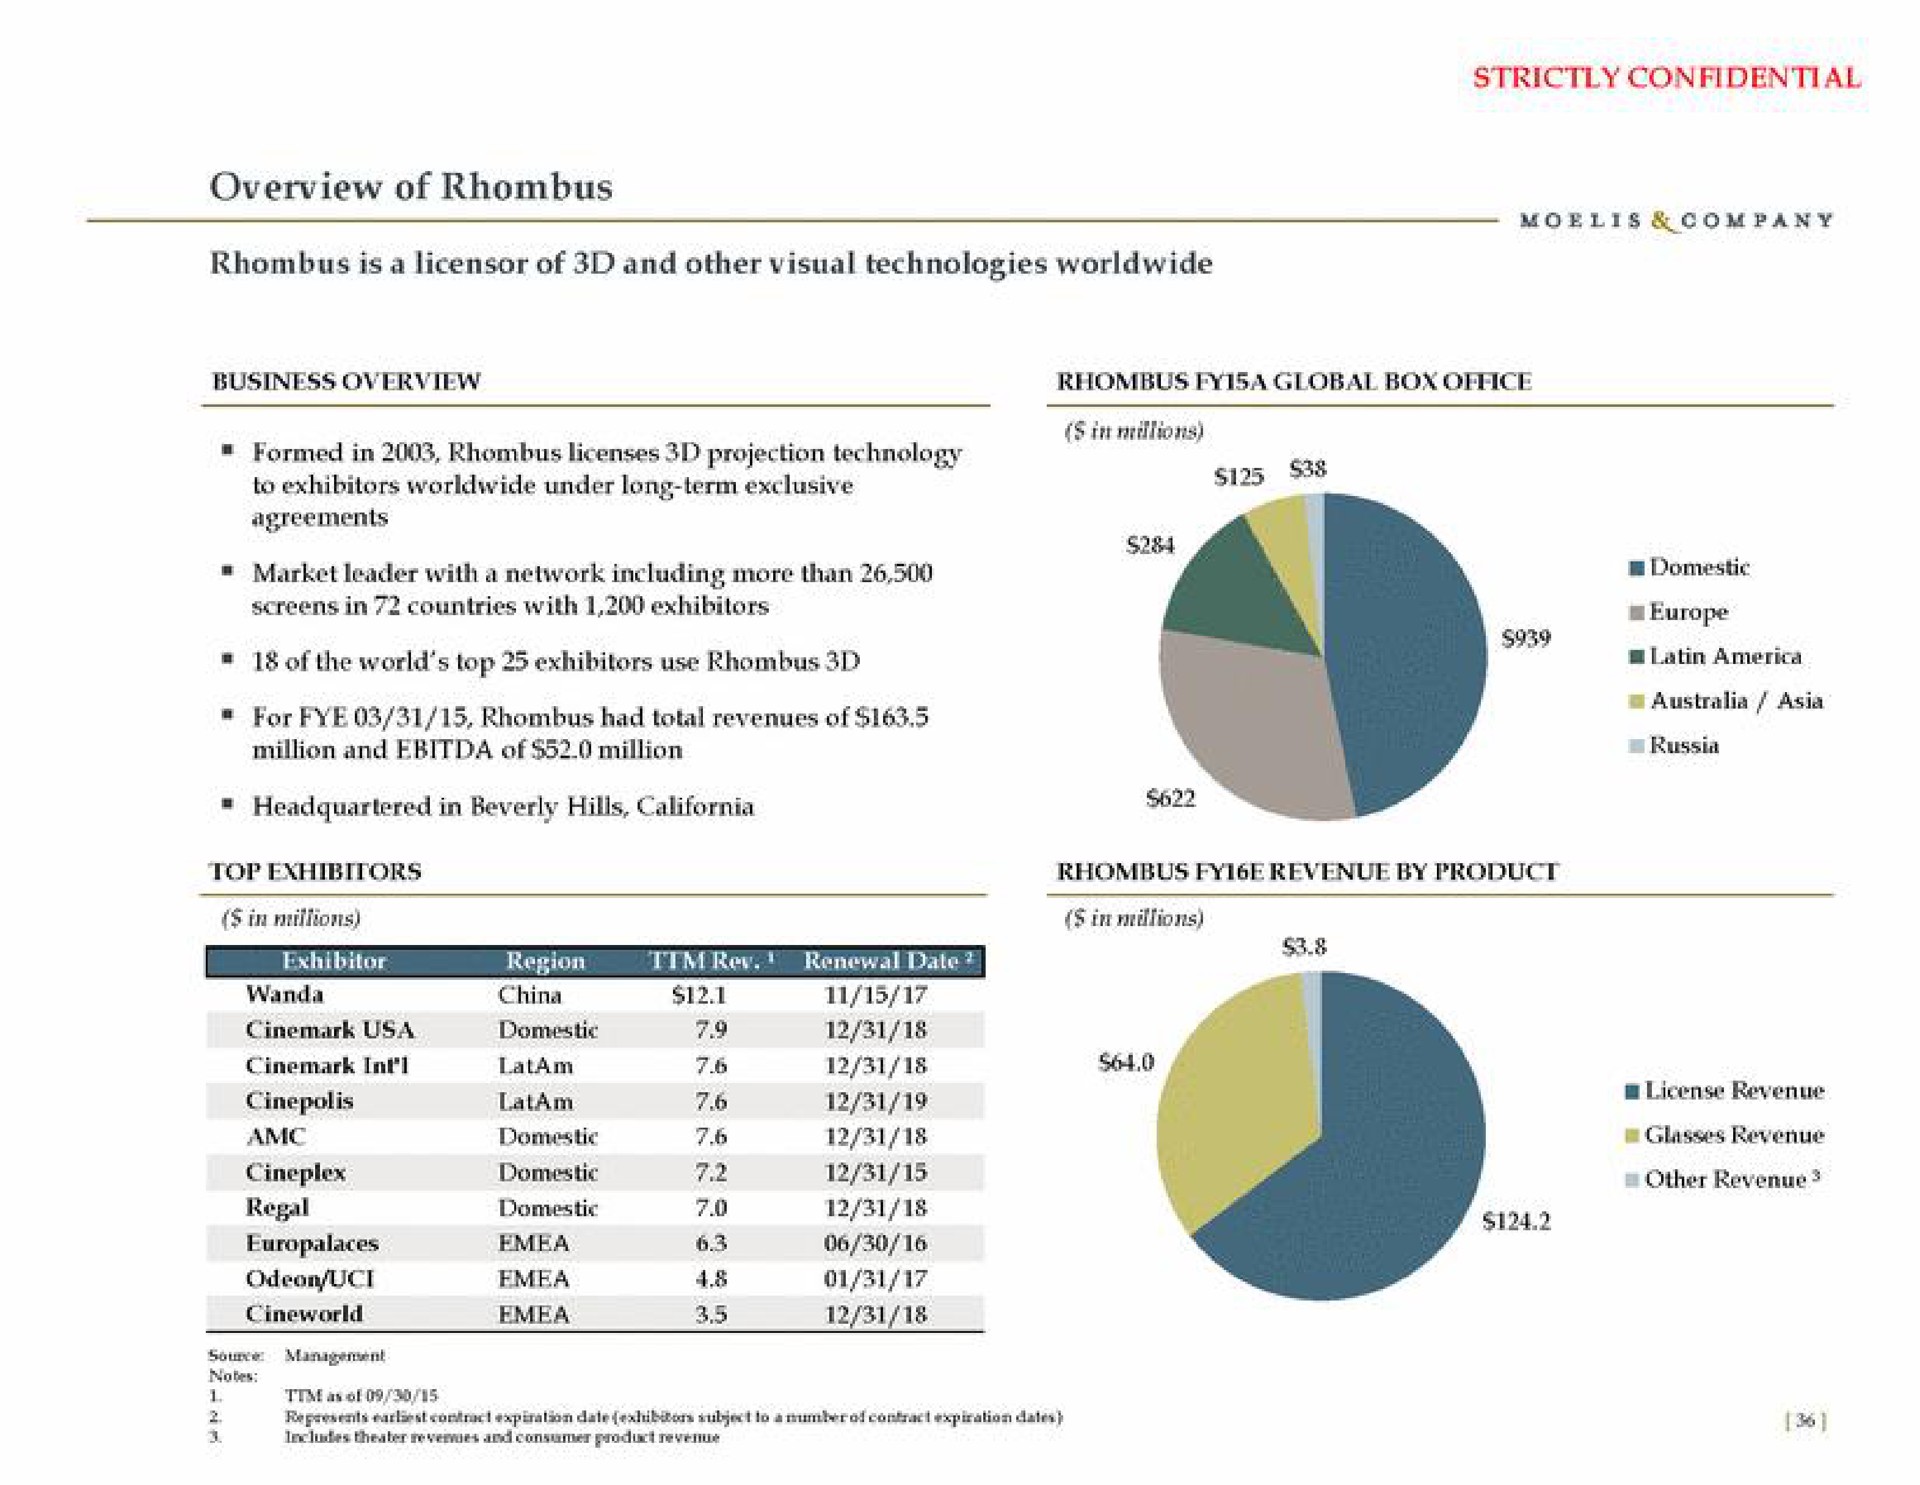 overview of rhombus rhombus is a licensor of and other visual technologies a china license revenue | Moelis & Company